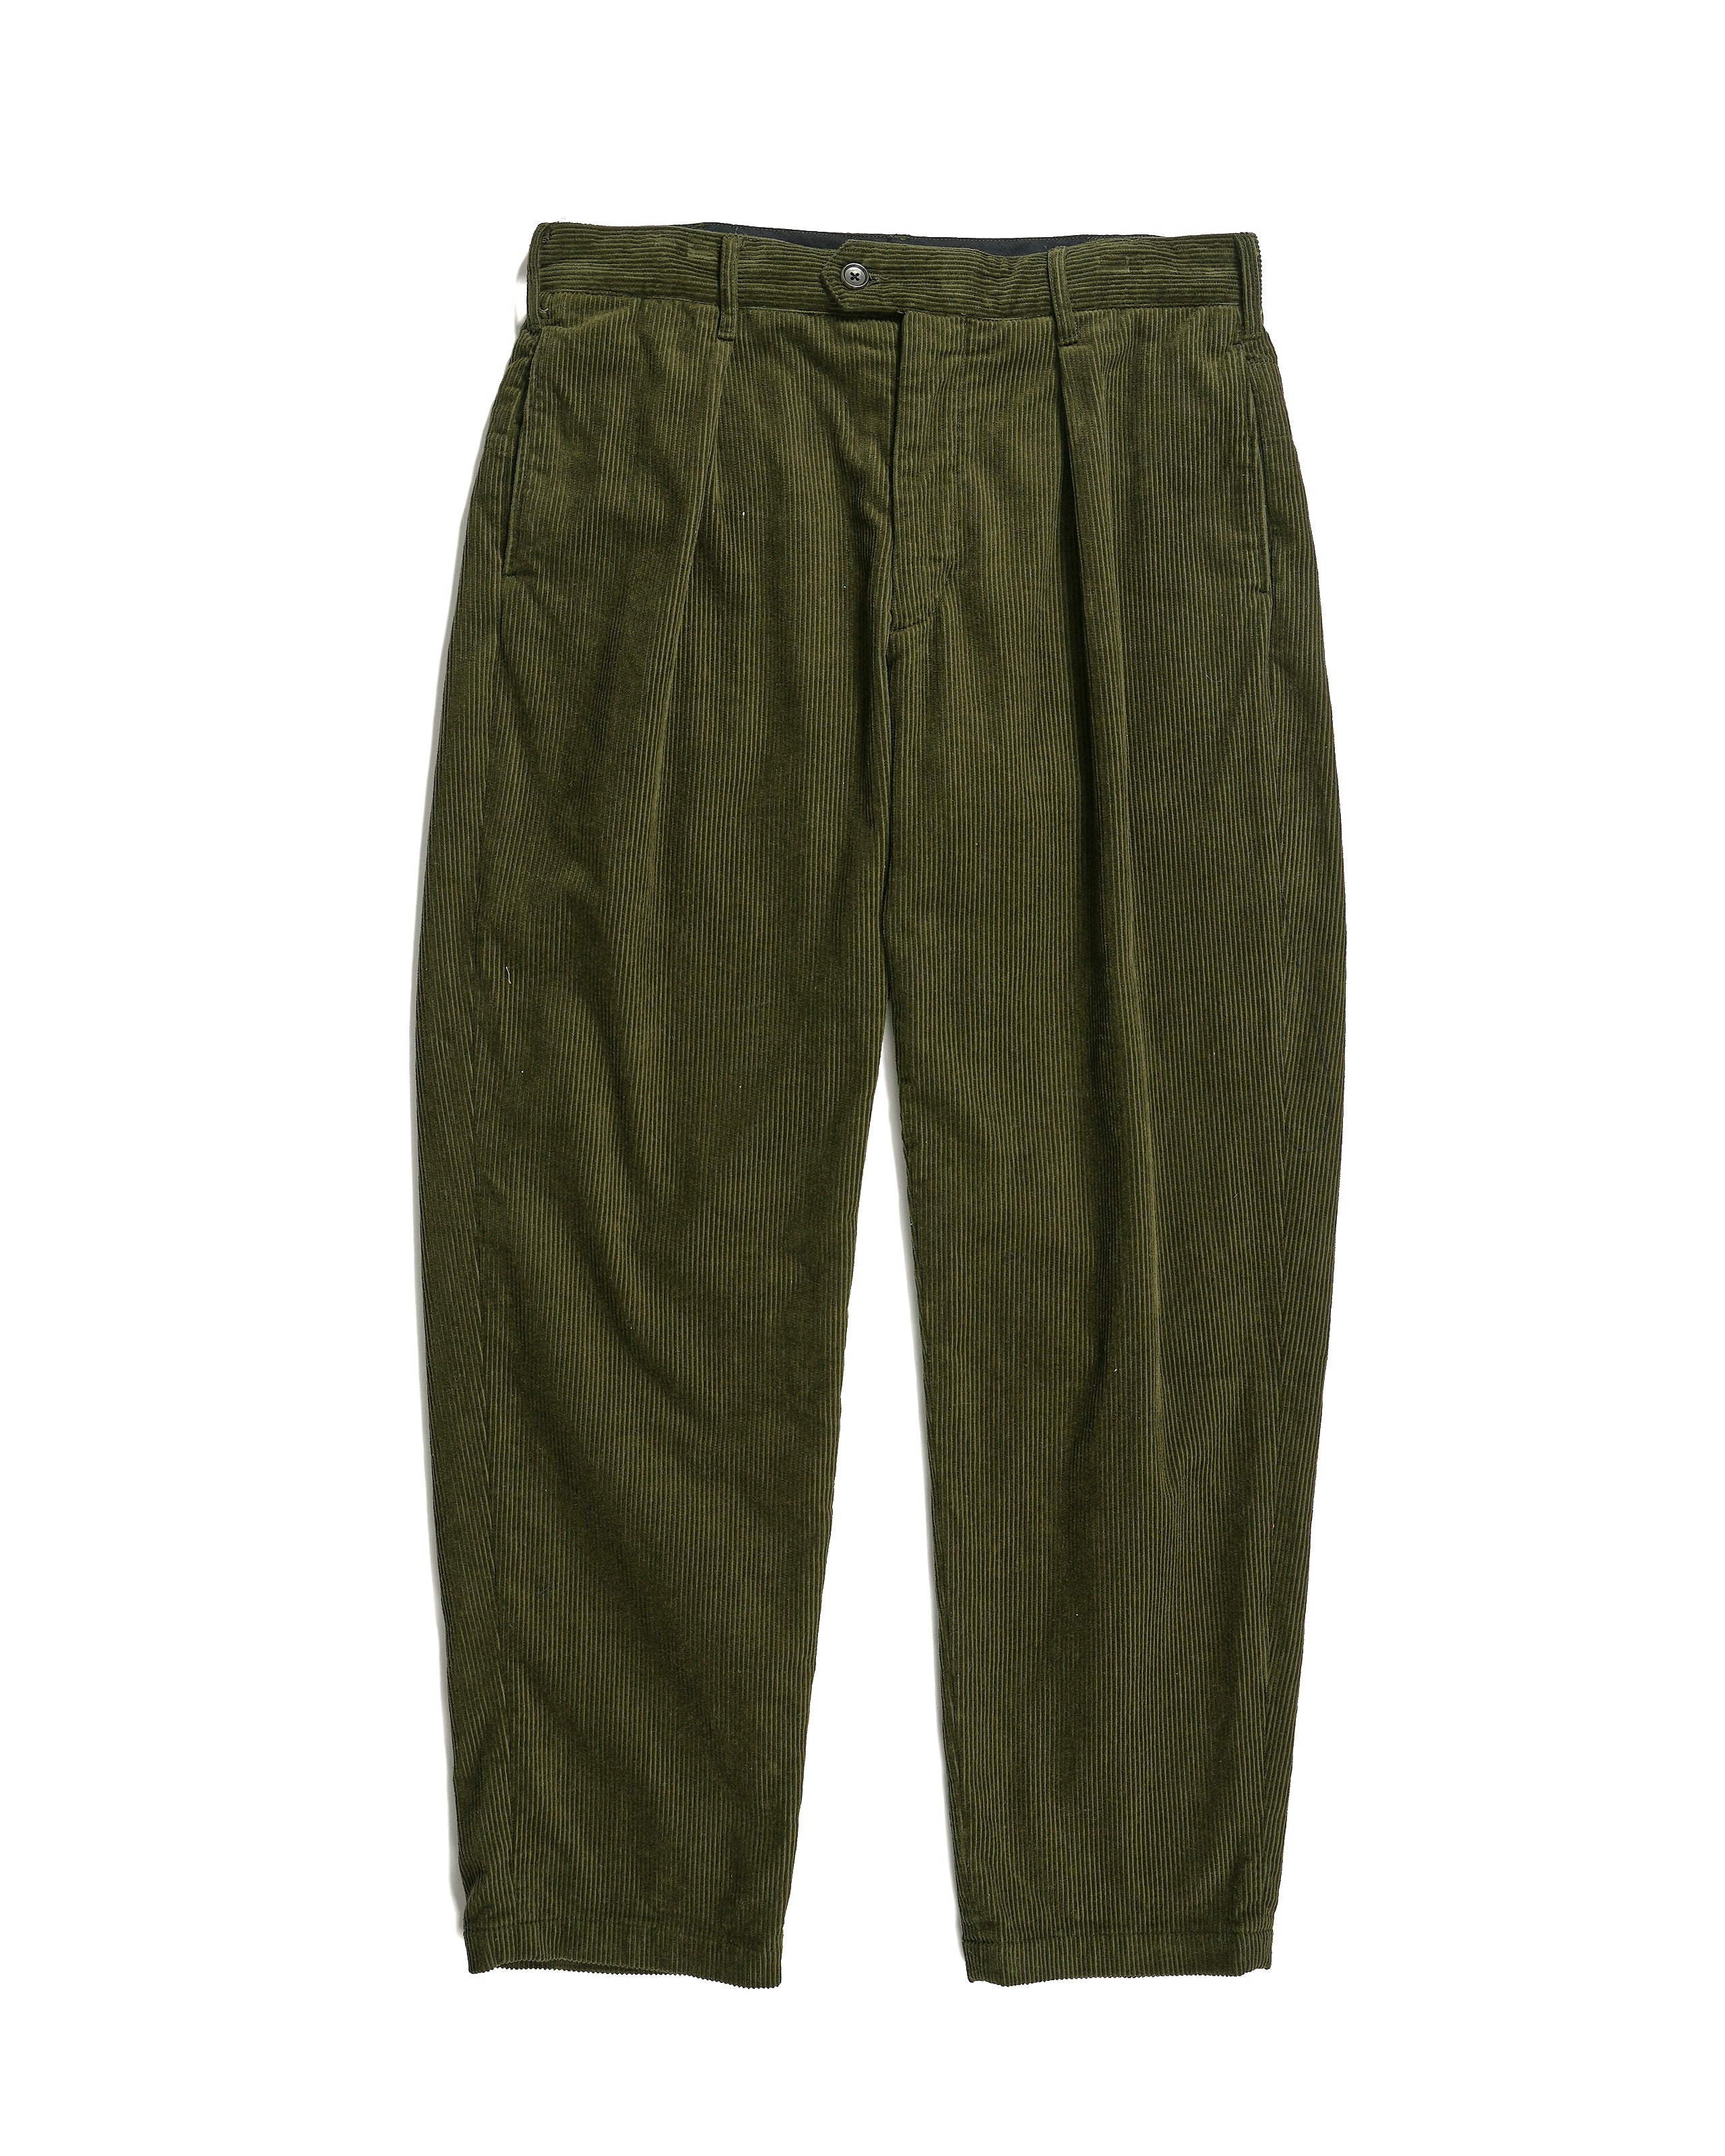 Carlyle Pant - Olive Cotton 8W Corduroy